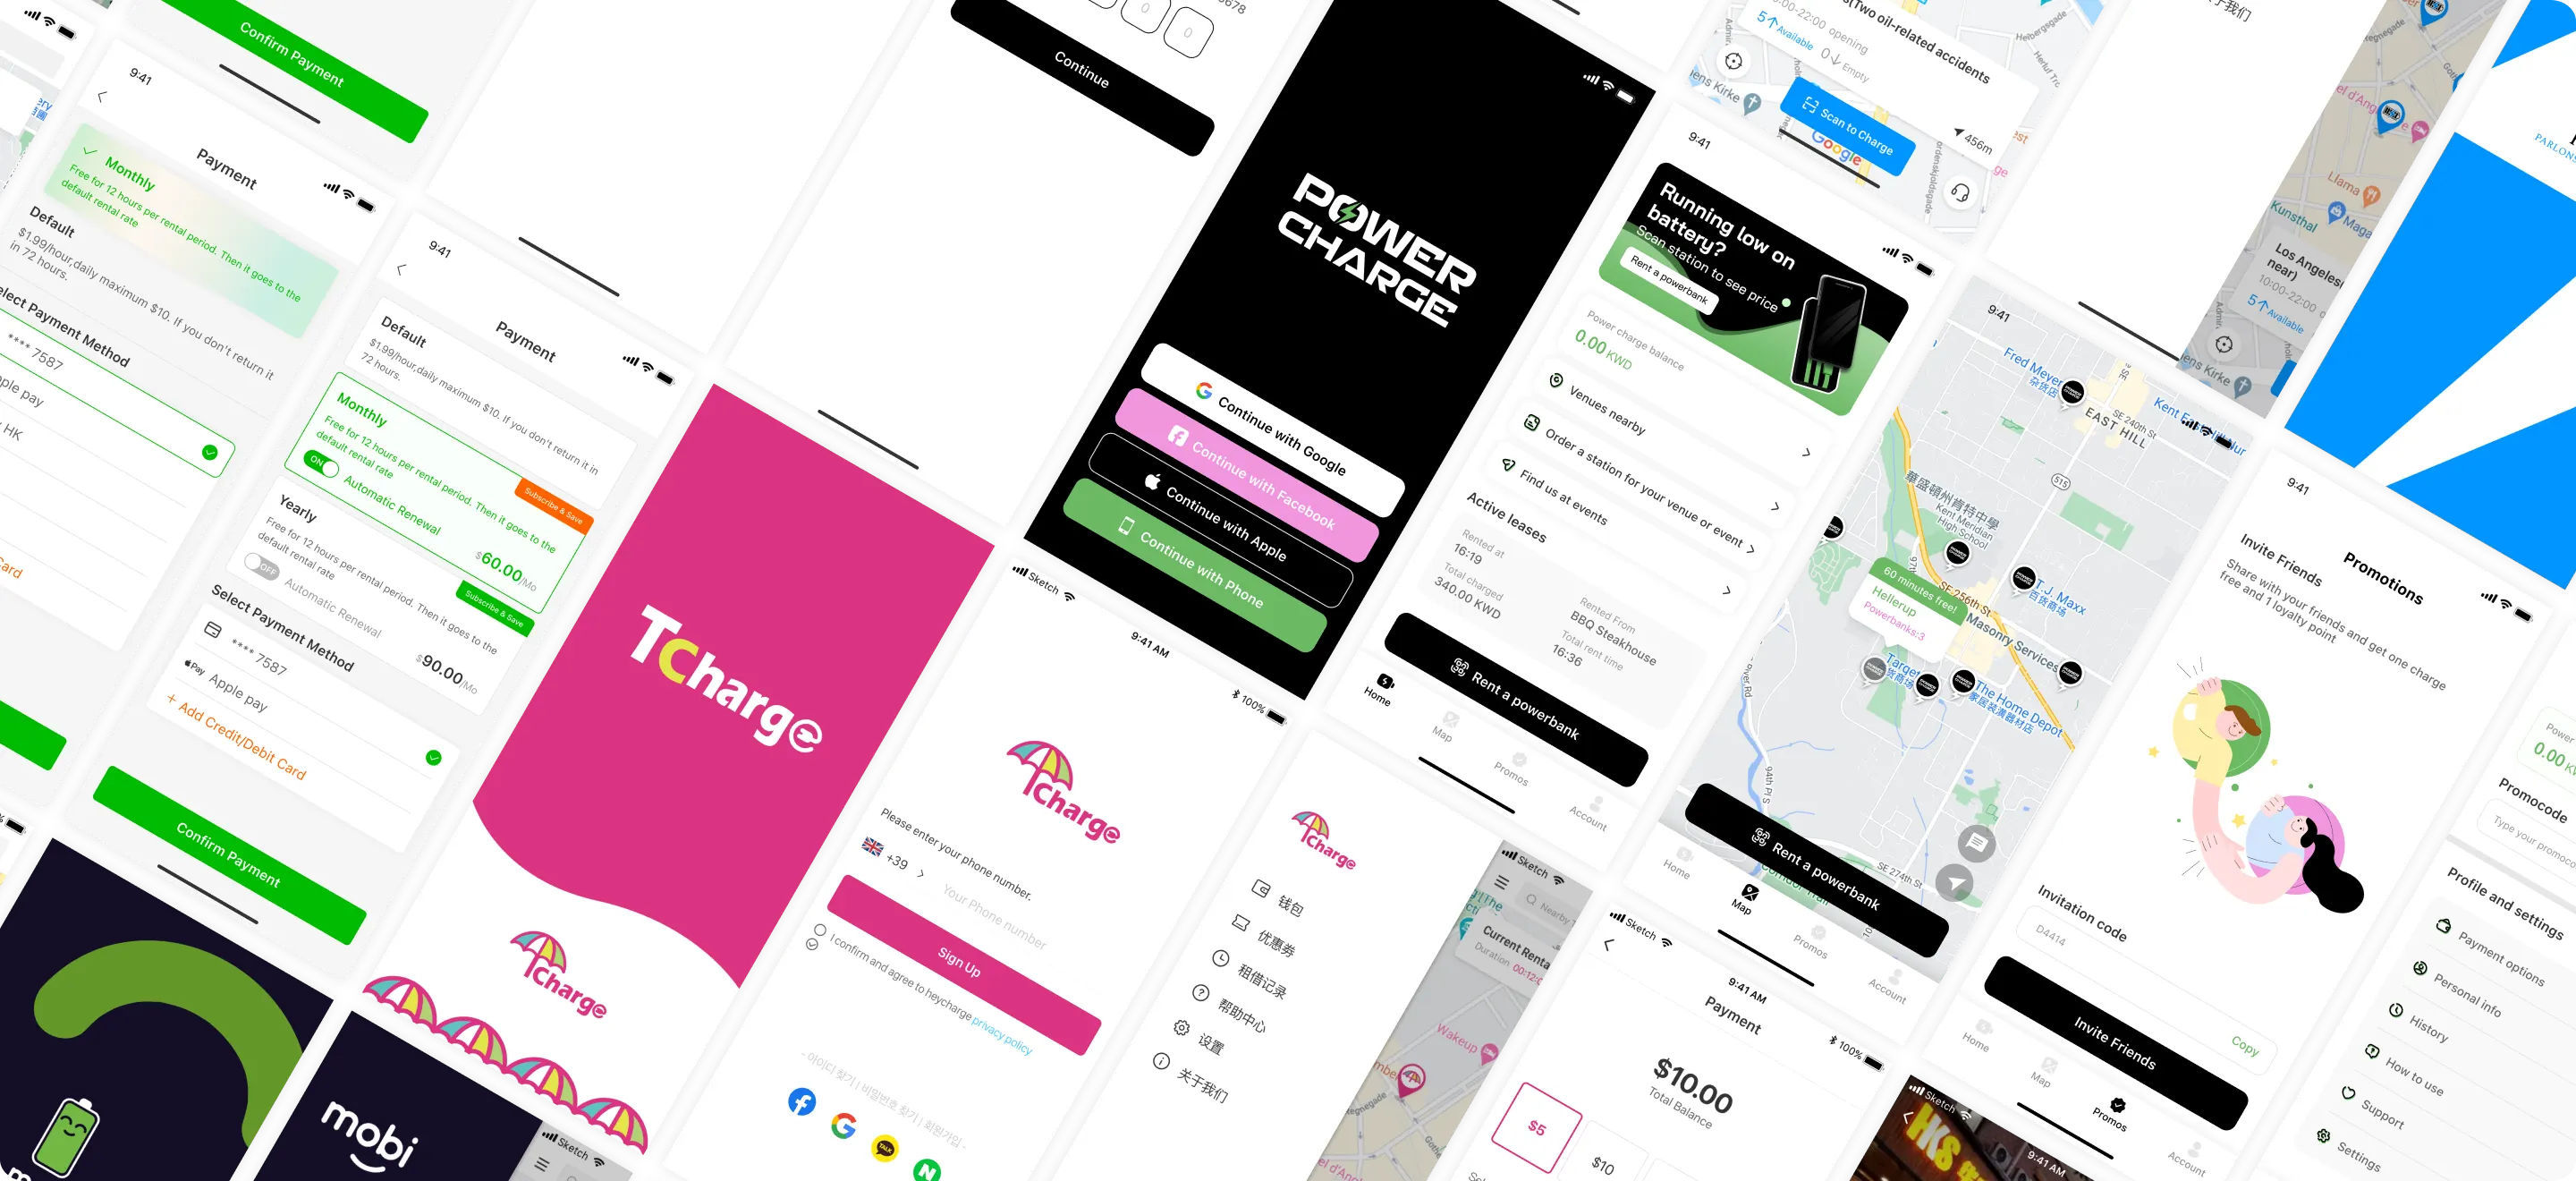 HeyCharge UI/UX designs for power bank sharing solutions